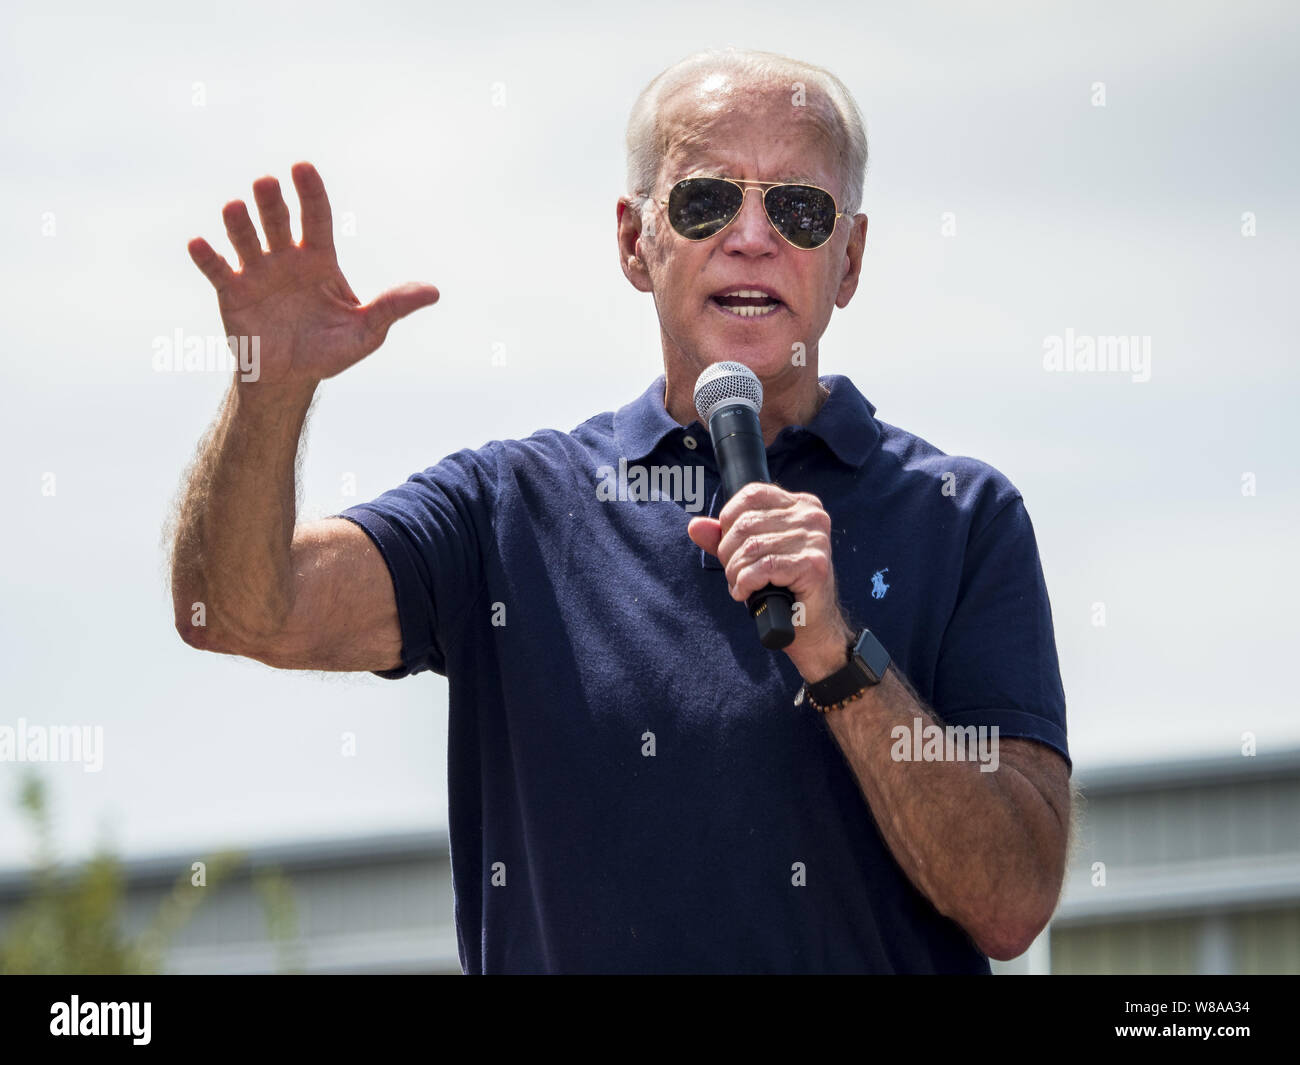 Des Moines, Iowa, USA. 8th Aug, 2019. Former Vice President JOE BIDEN speaks at the Des Moines Register Political Soapbox at the Iowa State Fair. Vice President Biden spoke at the Des Moines Register Political Soapbox at the Iowa State Fair Thursday. Biden is running to be the Democratic nominee for President in 2020. Iowa holds the first selection event of the 2020 election cycle. The Iowa Caucuses are on February 3, 2020. Credit: Jack Kurtz/ZUMA Wire/Alamy Live News Stock Photo